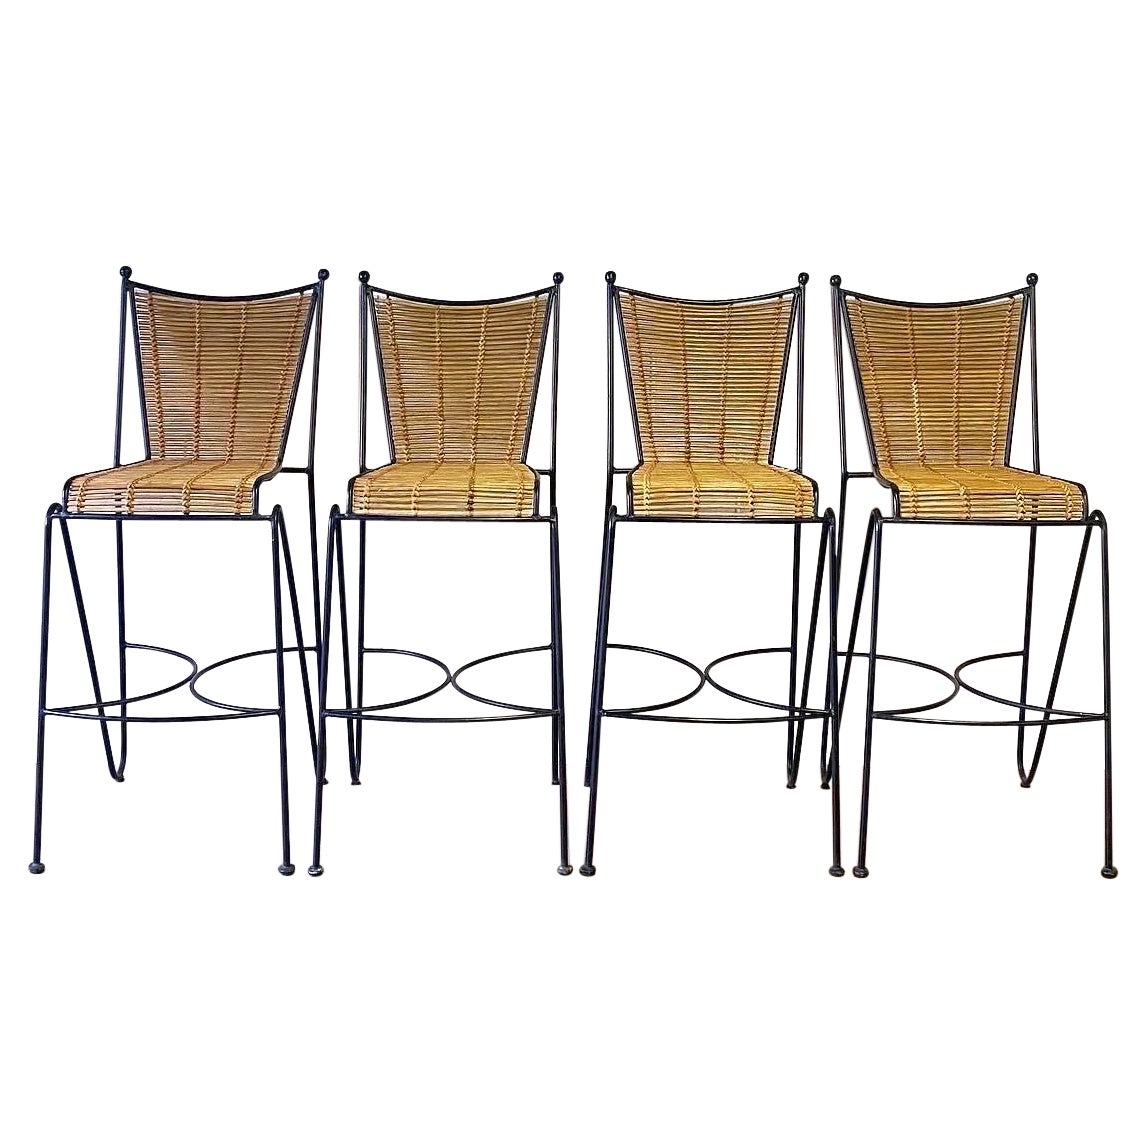 Beautiful Vintage Mid-Century Modern Iron and Bamboo Reed Set of Four Barstools